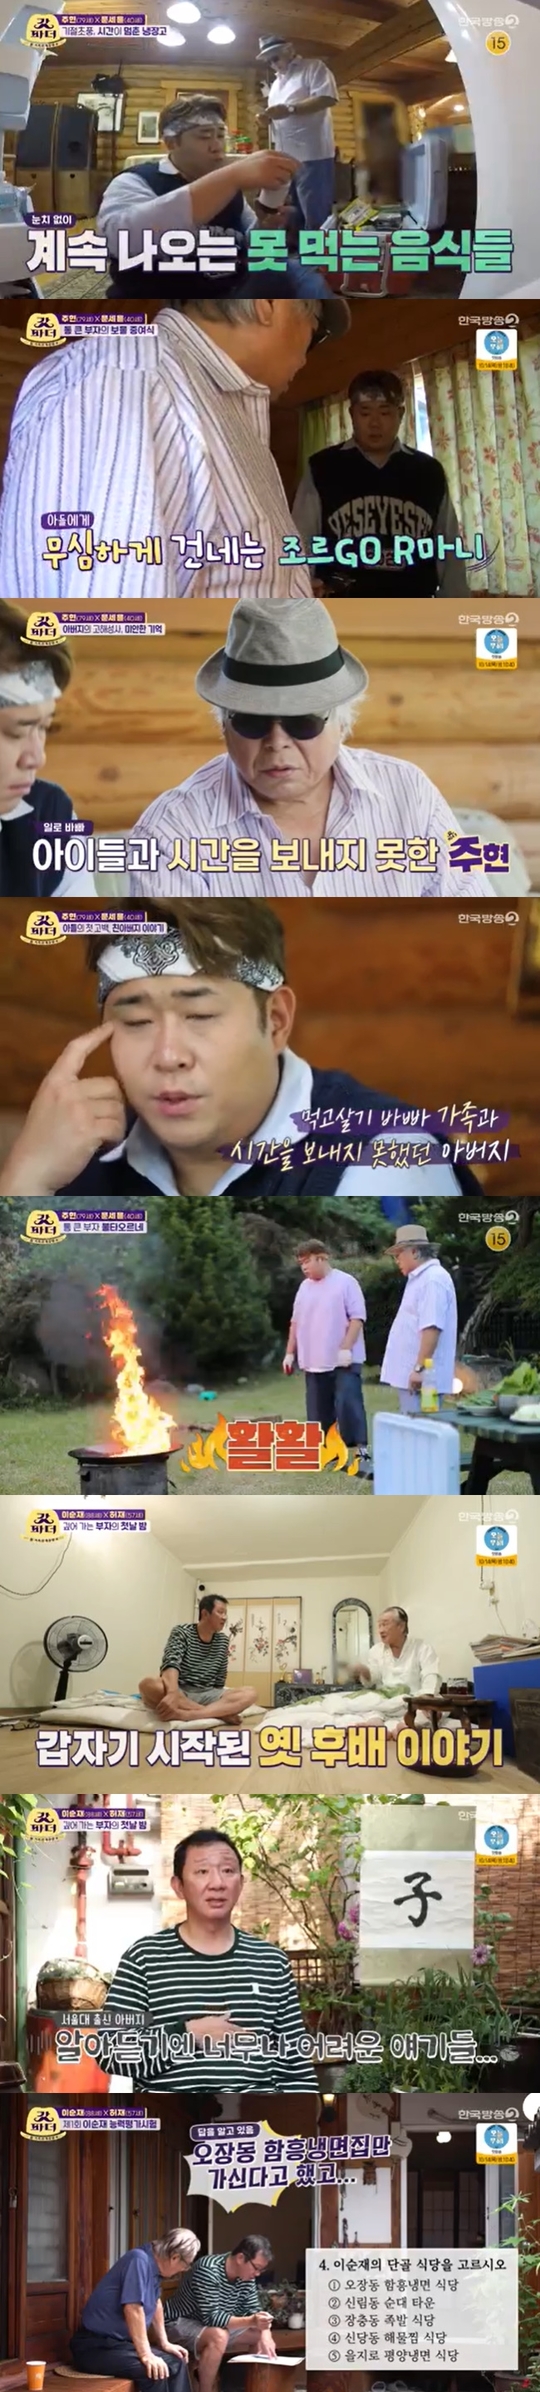 Jang Min-Ho and Kim Kap-soo understood each other with stories about their late father.On KBS 2TV The Last Godfather broadcast on October 9, the stories of Kim Kap-soo, Jang Min-Ho, Joo Hyun and Mun Se-yun, Lee Soon-jae and Hur Jae Wealthy were revealed.Kim Kap-soo, who lost to the game and became the evening leader, took on Jang Min-Ho to take the ingredients naturally and embarrassed Jang Min-Ho by putting tap water in the dough.Its too visual shock, said Jang Min-Ho, who had finished the kimchi exhibition after twists and turns, and told the production team, It was a big thing.Kim Kap-soo, who heard this, said, I am overwhelmed. Bibimbap or kimchi. I write it down in my mind.After the meal, Kim Kap-soo asked, Idol started the agency at first, and Jang Min-Ho said, It was a case of debut just after entering.It was hard for the members to get inflamed with each other, and we couldnt keep the team anymore, he said, explaining why he disbanded the team in two years.After that, I continued to challenge with songs, but it did not work like I thought.Jang Min-Ho, who continued to increase his debt, recalled Memory, who lived in a warehouse-like house with a deposit of 200,000 won and a monthly rent of 200,000 won.Jang Min-Ho said, I lived there and had a skin disease and I treated it for a long time.When my brother was unknown, he kept depositing more than one million won in monthly money, he said.Sister gave me a car if I went to Seoul and I did not have pocket money.I was implicitly cheering my brother, who was suffering, because he was frustrated because he could not keep it long even though he became a singer, he told Family.Jang Min-Ho sang his own song You Know My Name, which he created by recalling his late father ahead of his trot singer debut.Kim Kap-soo, who felt saddened by the song of Jang Min-Ho, said, My father died in the fourth grade of elementary school and my mother died in the third grade of high school.I do not have much memory about my father, he said. I have a longer time of my fathers sacrifice than my father and my life.Mun Se-yun, who came to Joo Hyuns house with a full of tea ingredients, filled the refrigerator with a refrigerator and a cupboard that had been in circulation for a long time, and then filled the refrigerator with pork belly, soju, kimchi and pickles from home.Joo Hyun Gifted his luxury sunglasses, which he cared about like Treasure 1, in return for Mun Se-yun, who arranged the refrigerator.The two watched the album together with the youthful appearance of Joo Hyun.When asked why there are not many pictures of their children, Joo Hyun said that he did not spend much time with his children because he was busy in his youth. I lived without knowing my father because I had a child at a young age.I didnt know how to look up to my children. It was a blunt father. They were good.Mun Se-yun also said, I dont have many pictures of myself with my father, and he was busy eating and living and working too hard.My father died when I made my celebrity debut. I was saddened to recall my father who died too early.After signing the Family Relations Certificate, Mun Se-yun made a big bow to Joo Hyun with gratitude and respect.Joo Hyun was delighted that you and I seem to have a relationship in the past life, and Mun Se-yun made a relationship with Wealthy in the relationship between Joo Hyun and the benefactor.Mun Se-yun burned the firewood directly and baked the pork belly on the pot lid.Unlike the appearance that started with confidence, the pork belly was cooked only on the outside, and the oil from the pork belly caught the lid of the pot and the black smoke became thick.Joo Hyun was embarrassed by the fact that the fire truck was coming.Just before falling asleep, Lee Soon-jae showed off her acting passion by revising the script.When Hur Jae was surprised that what test do you take? Lee Soon-jae said, We do little to repeat what we did.No matter how similar his grandfather is, it depends on his personality, character, and status. He continued to talk about acting, music, and performances.Hur Jae said, In the old days, adults say that there is nothing to throw away.Its all good, but I dont understand it so much, so I thought, Id rather cook for my father.